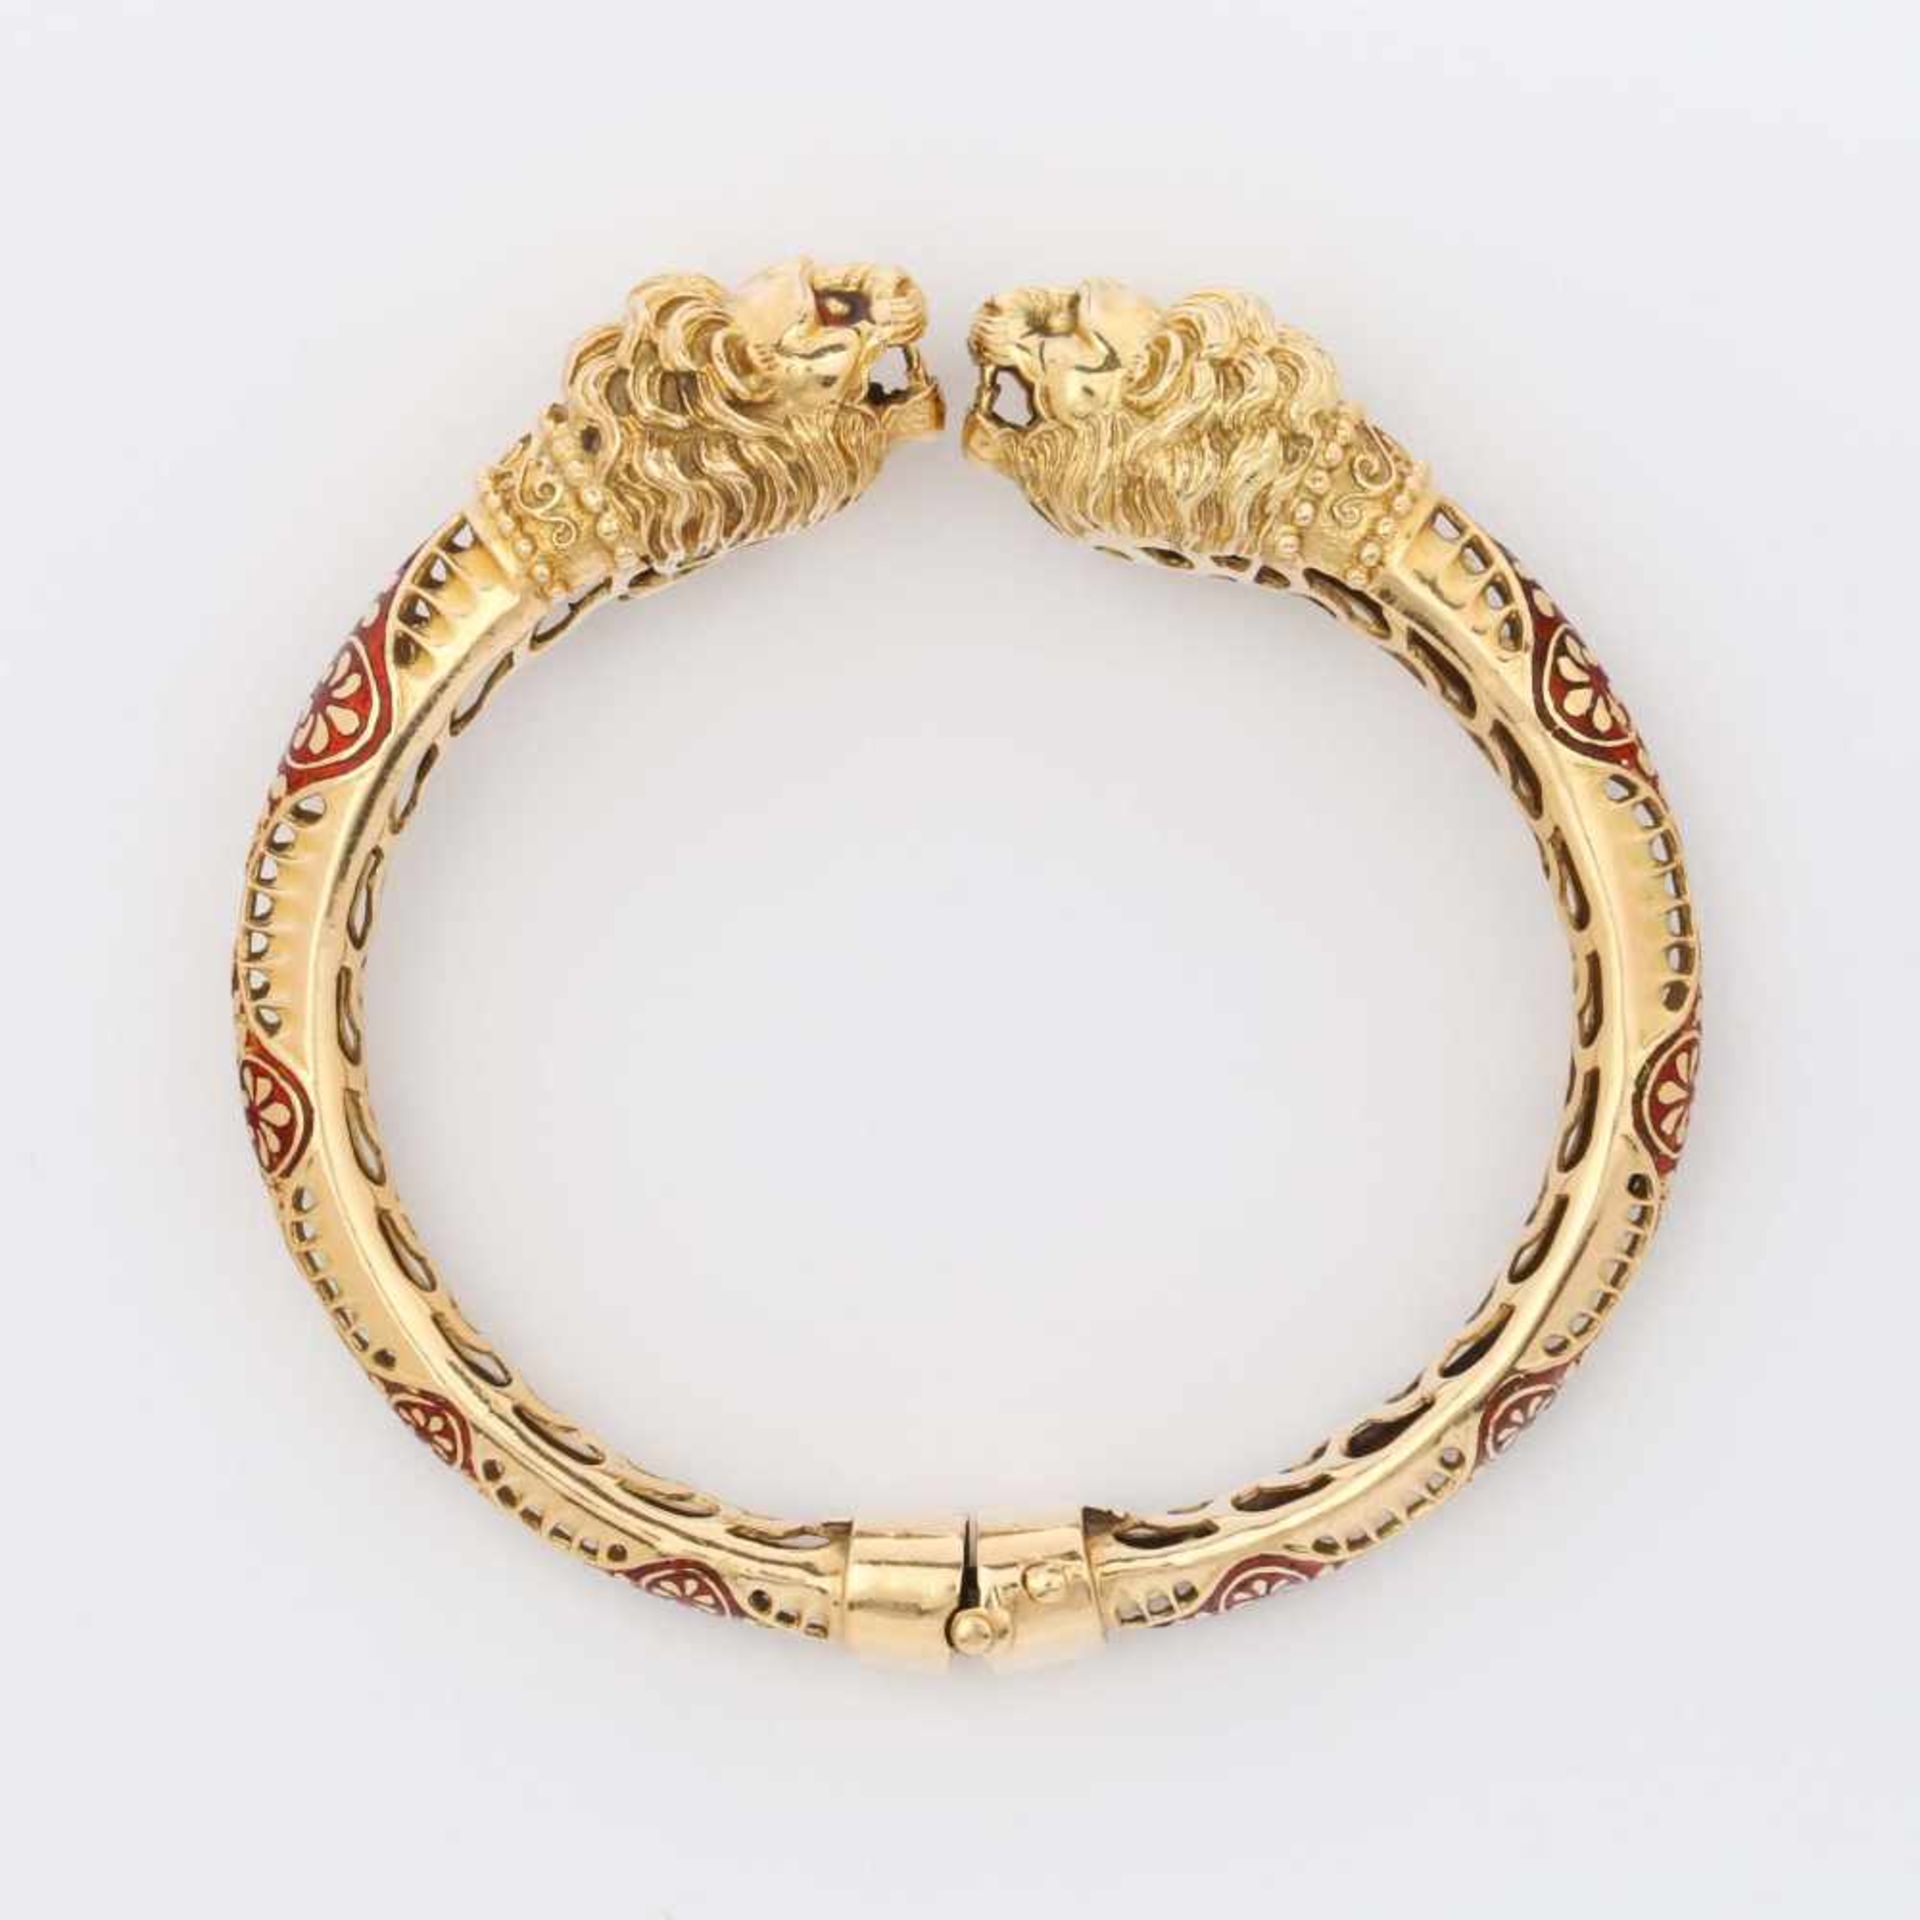 GOLD AND ENAMEL BANGLE, PROBABLY LALAOUNIS